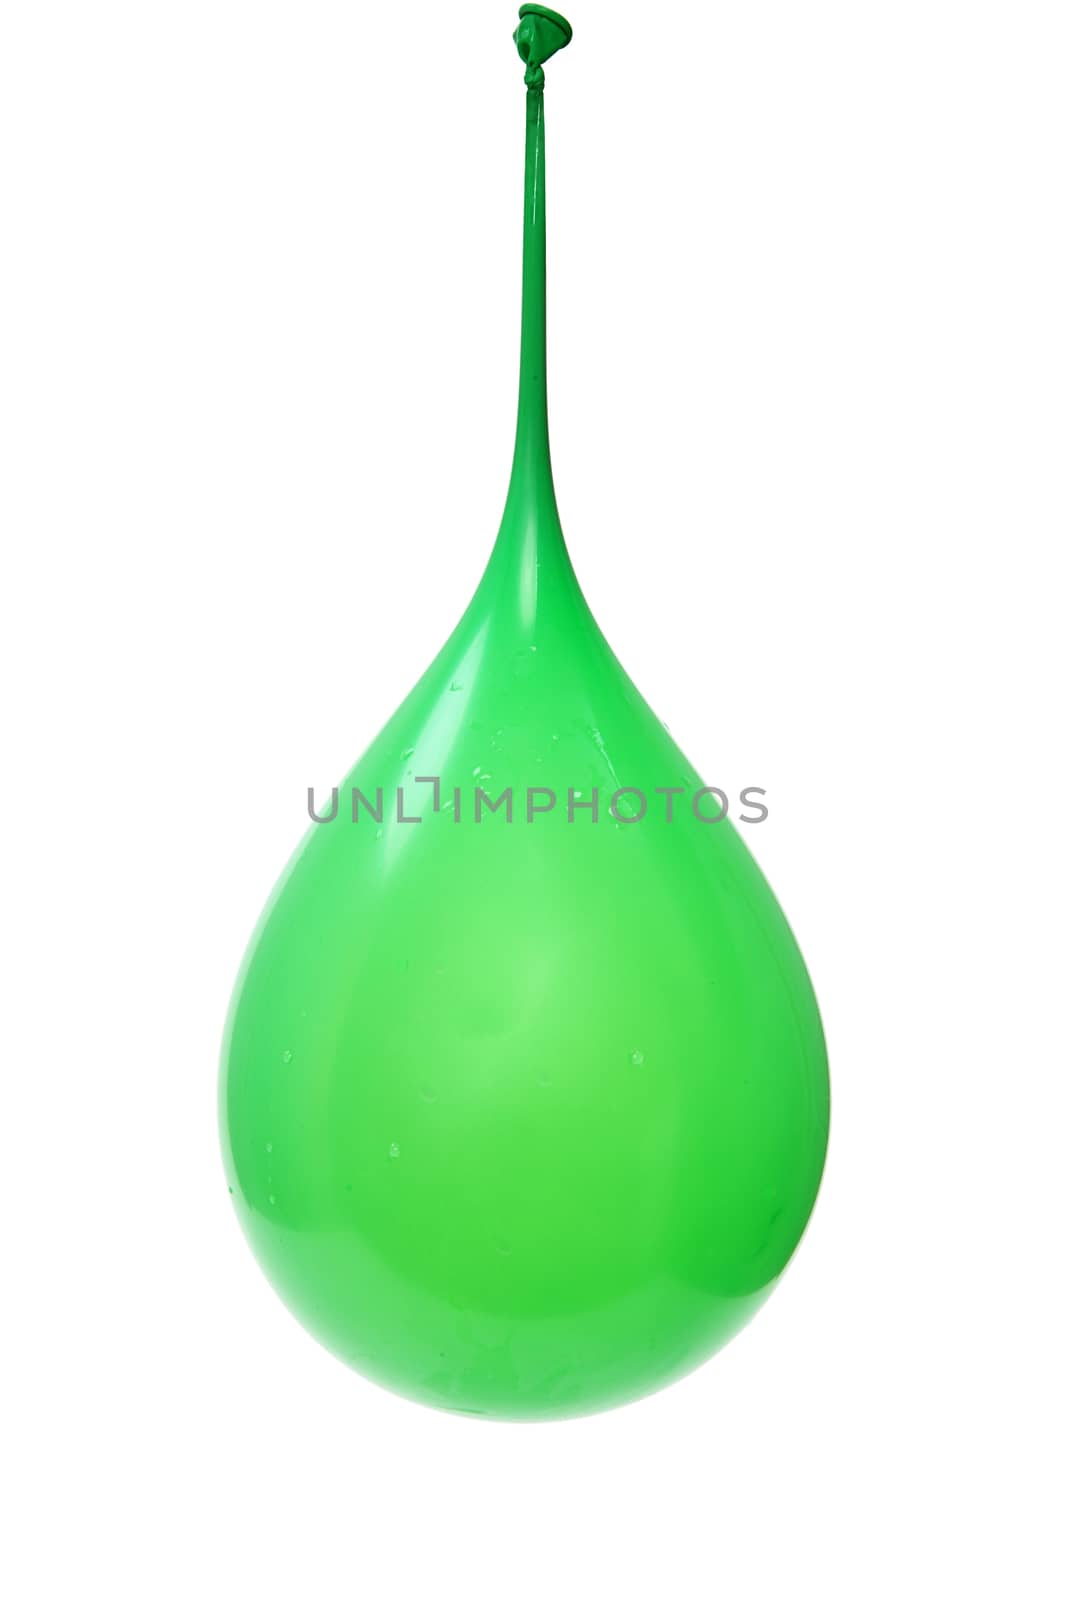 Water Filled Green Balloon Hanging Suspended Over White. Water droplets on outside.